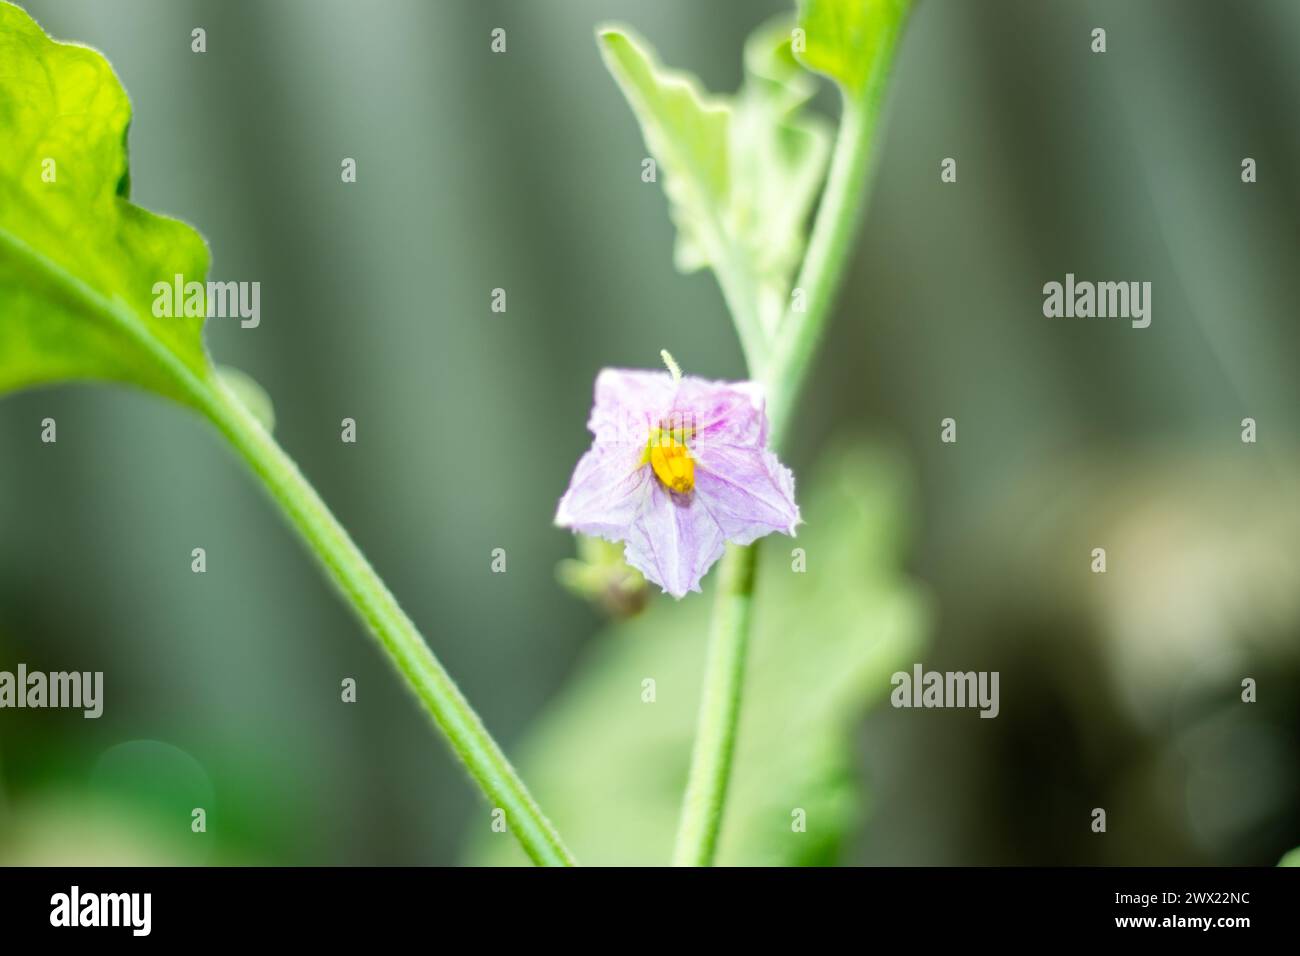 Potato flowers are small and similar to daffodils, they are easy to differentiate from daffodils. Potato plants produce flowers at the end of their gr Stock Photo